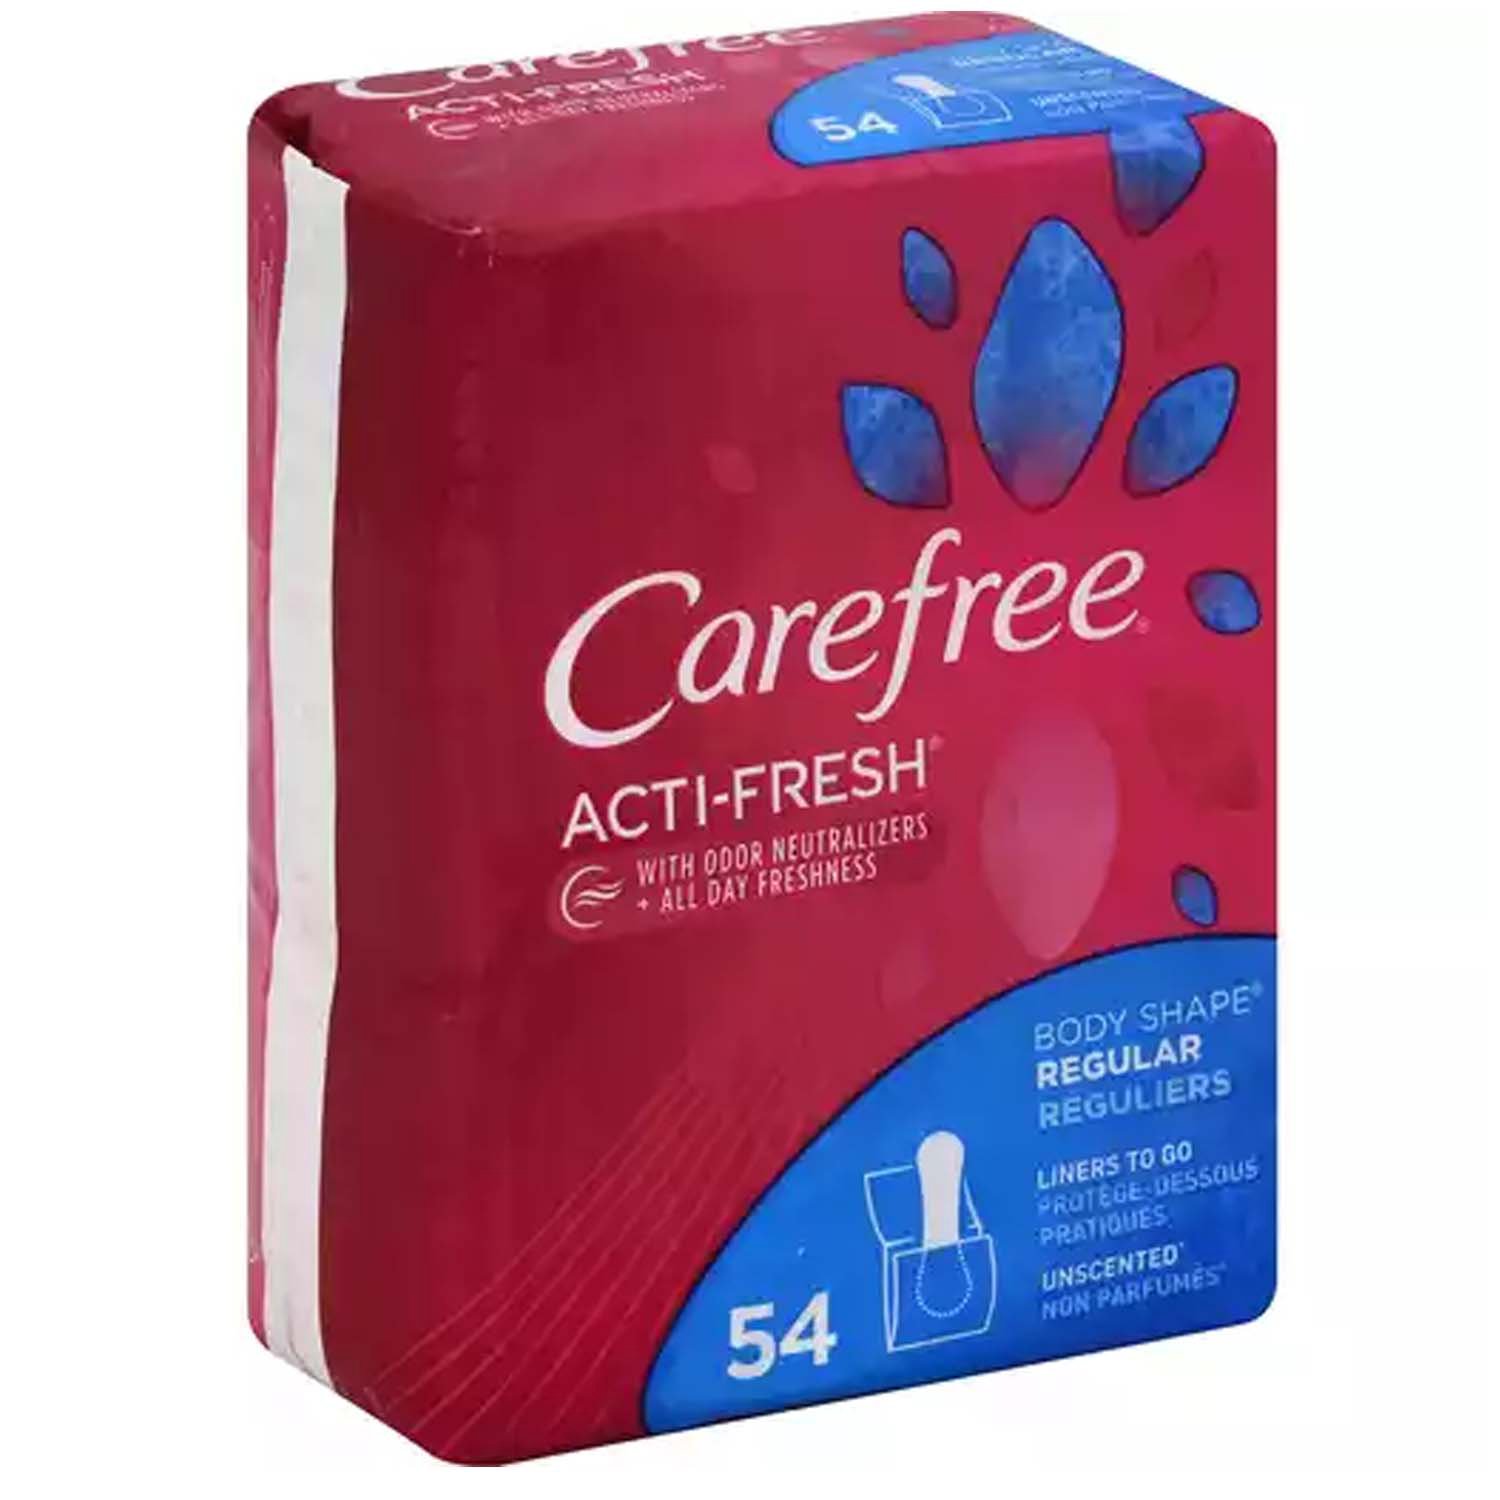 Carefree Acti-Fresh Pantiliners, Unscented